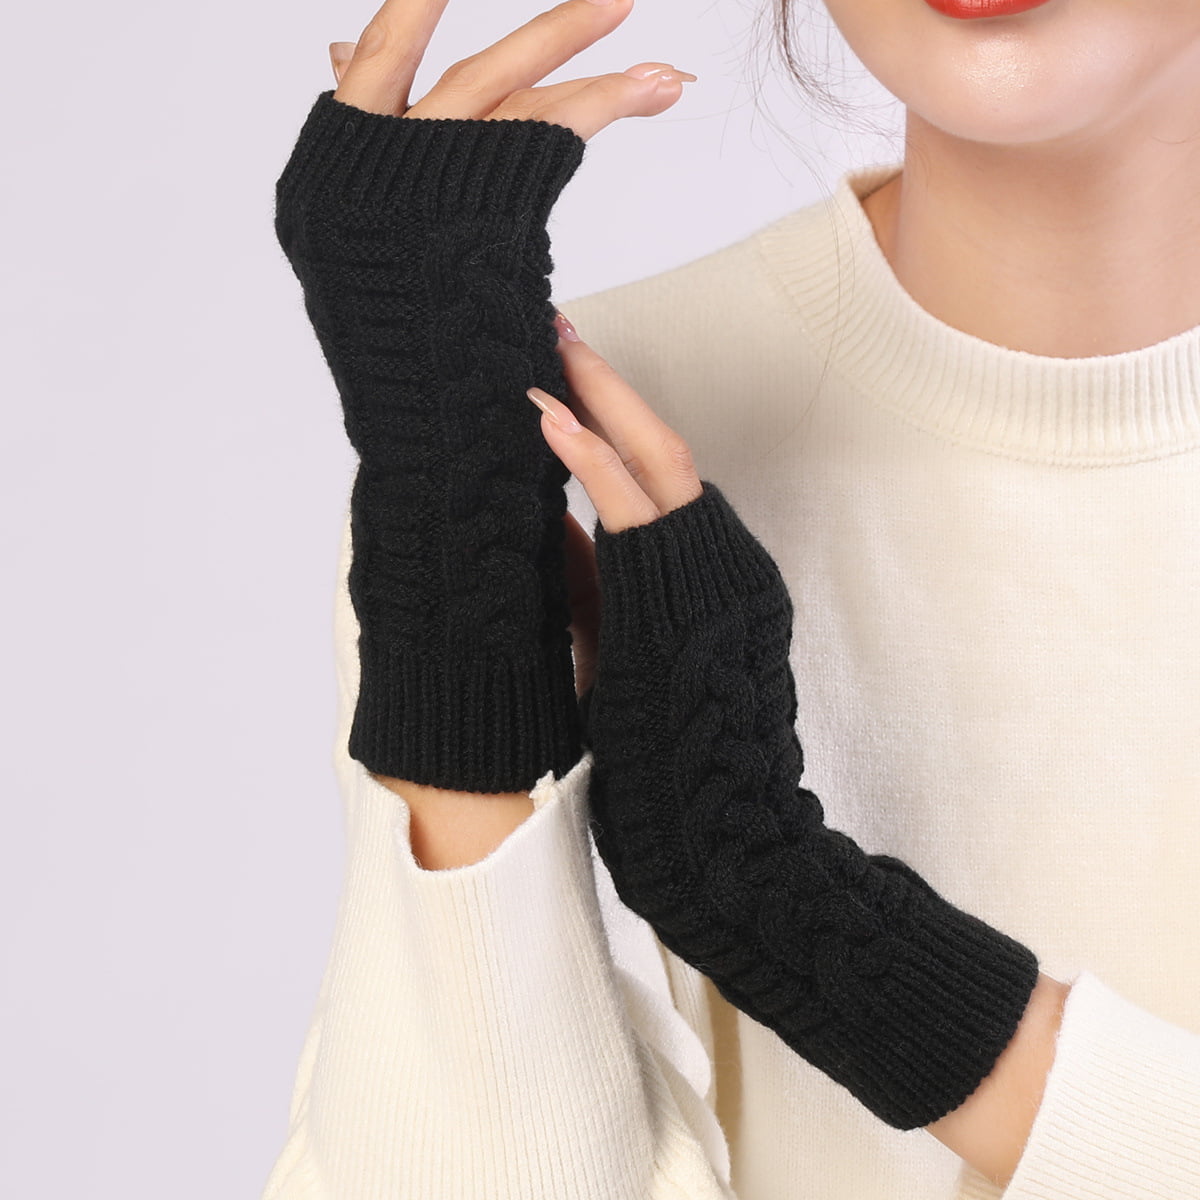 Free Shipping Flammi Skull Patterned Cable Knit Fingerless Gloves Thumb Hole .. 